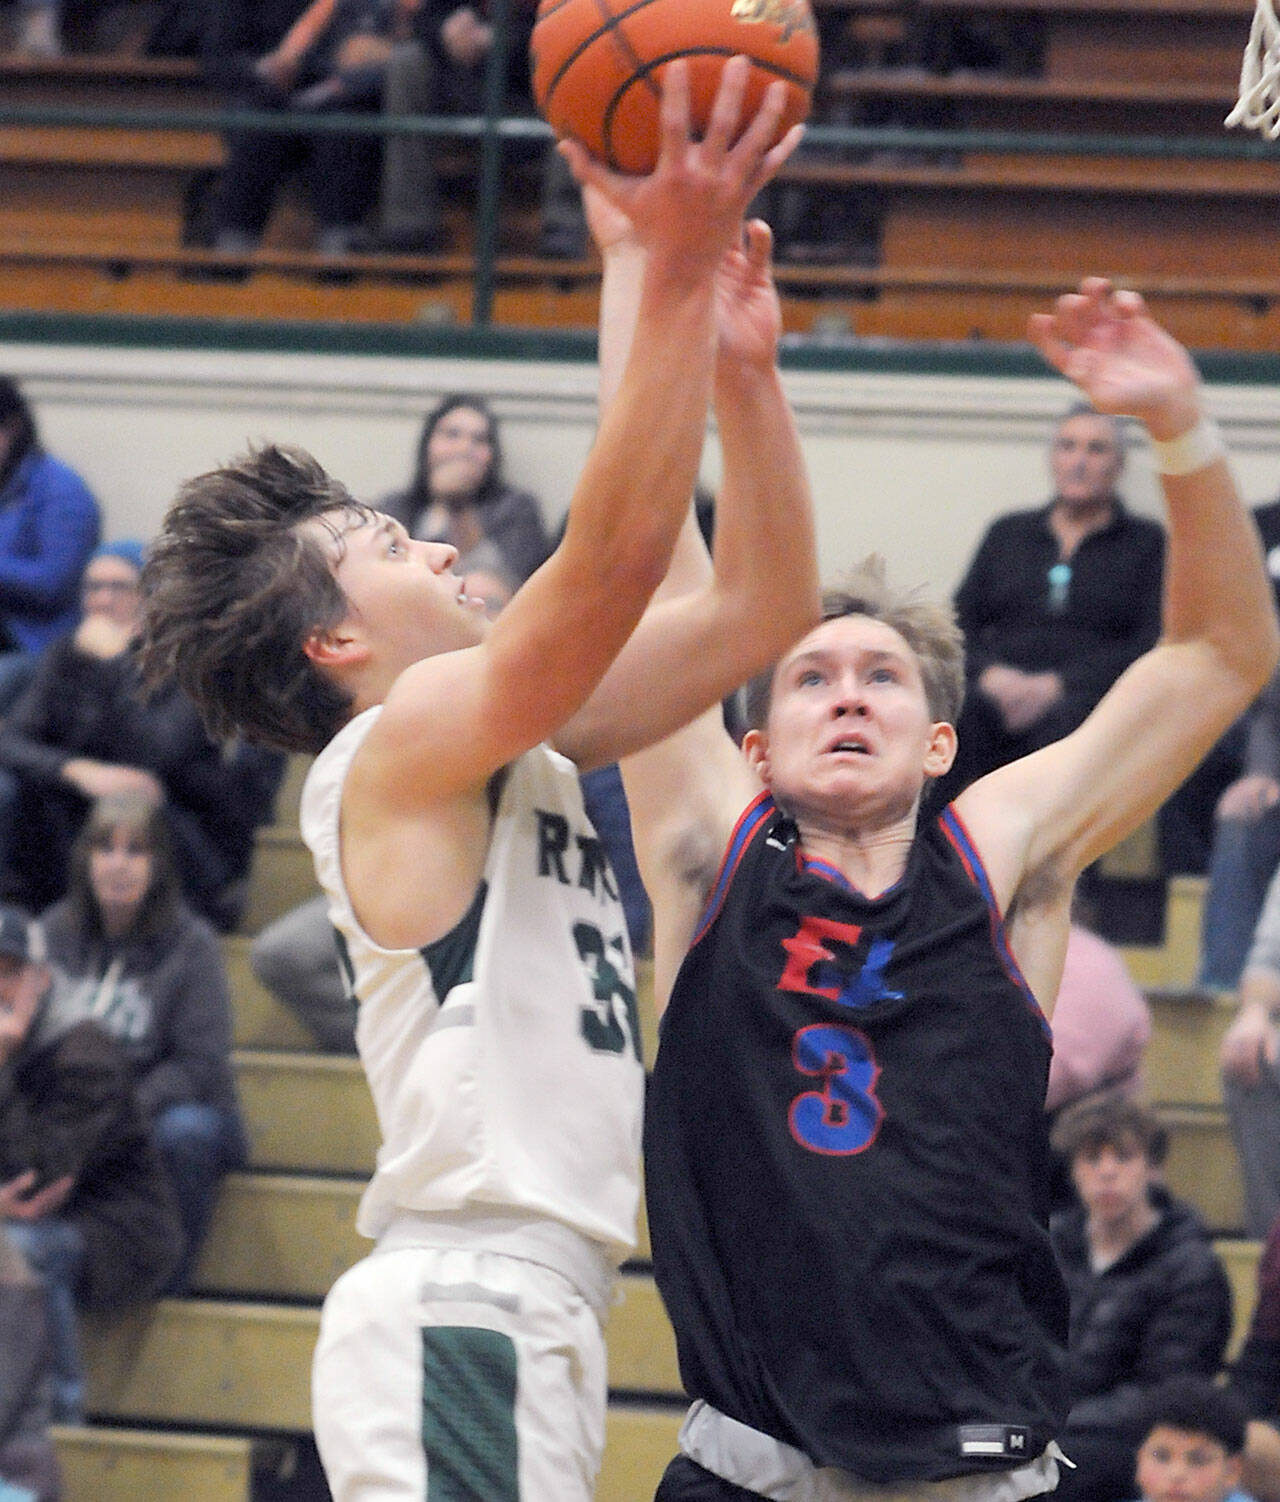 KEITH THORPE/PENINSULA DAILY NEWS Port Angeles’ Parker Nickerson, left, looks for the layup as East Jefferson’s Cash Holmes defends the lane on Thursday at Port Angeles High School.